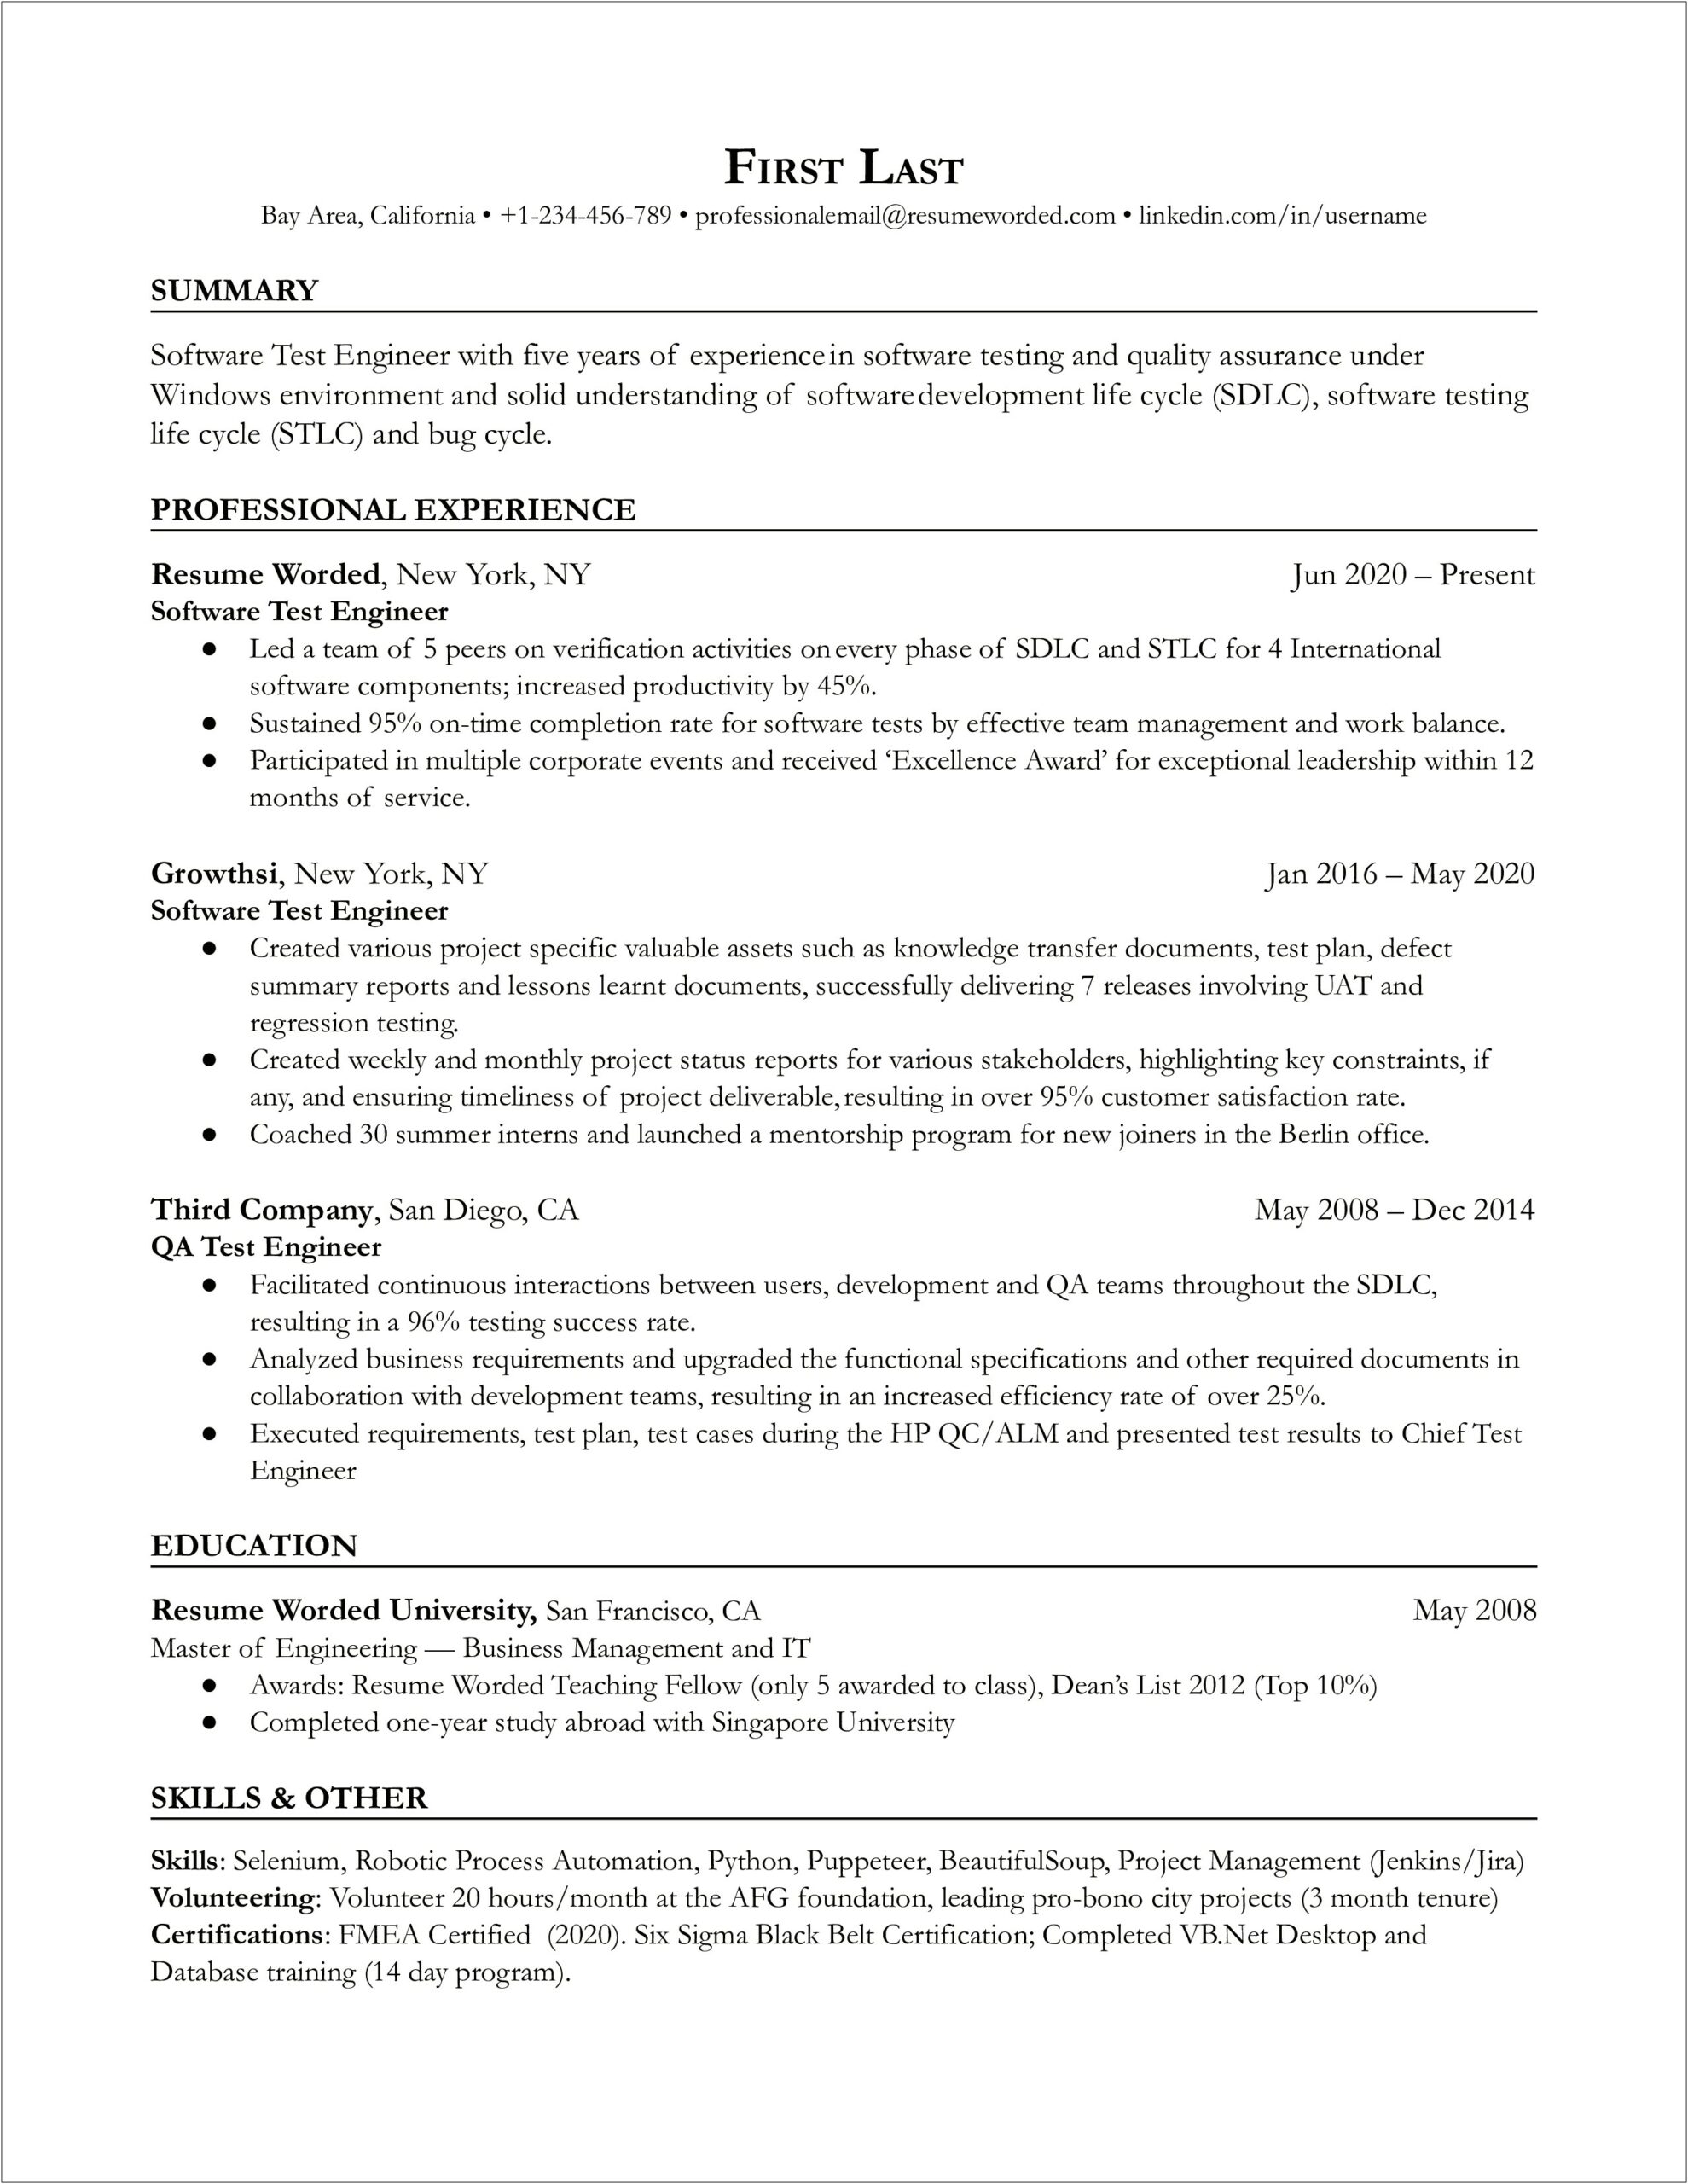 Test Driven Development Experience In Resume